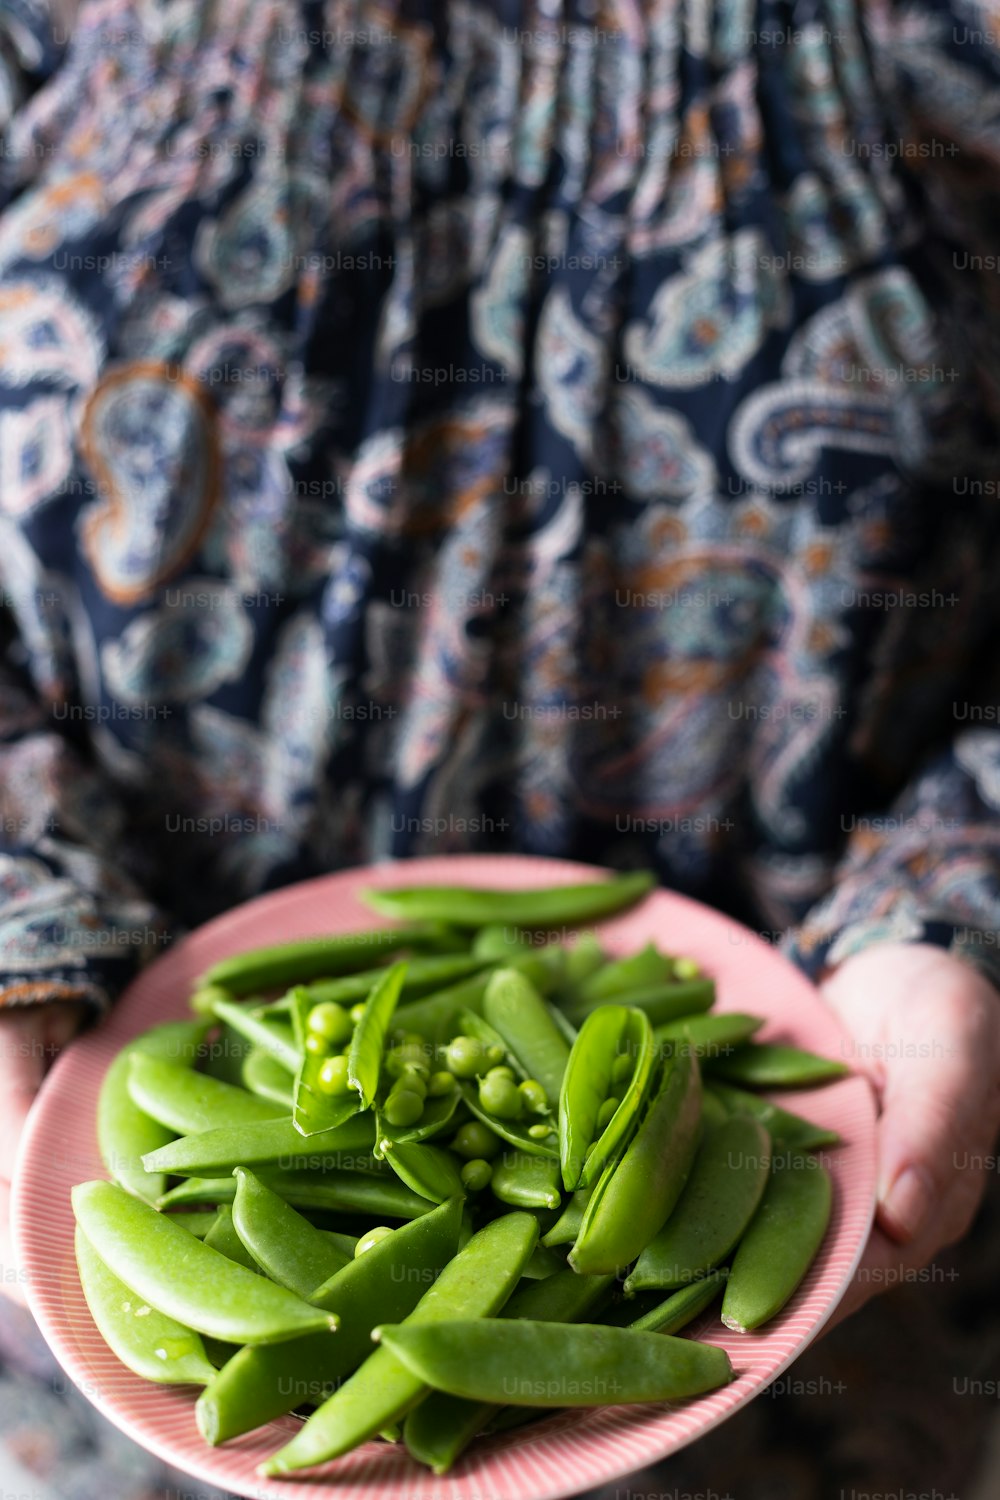 a person holding a plate of green beans